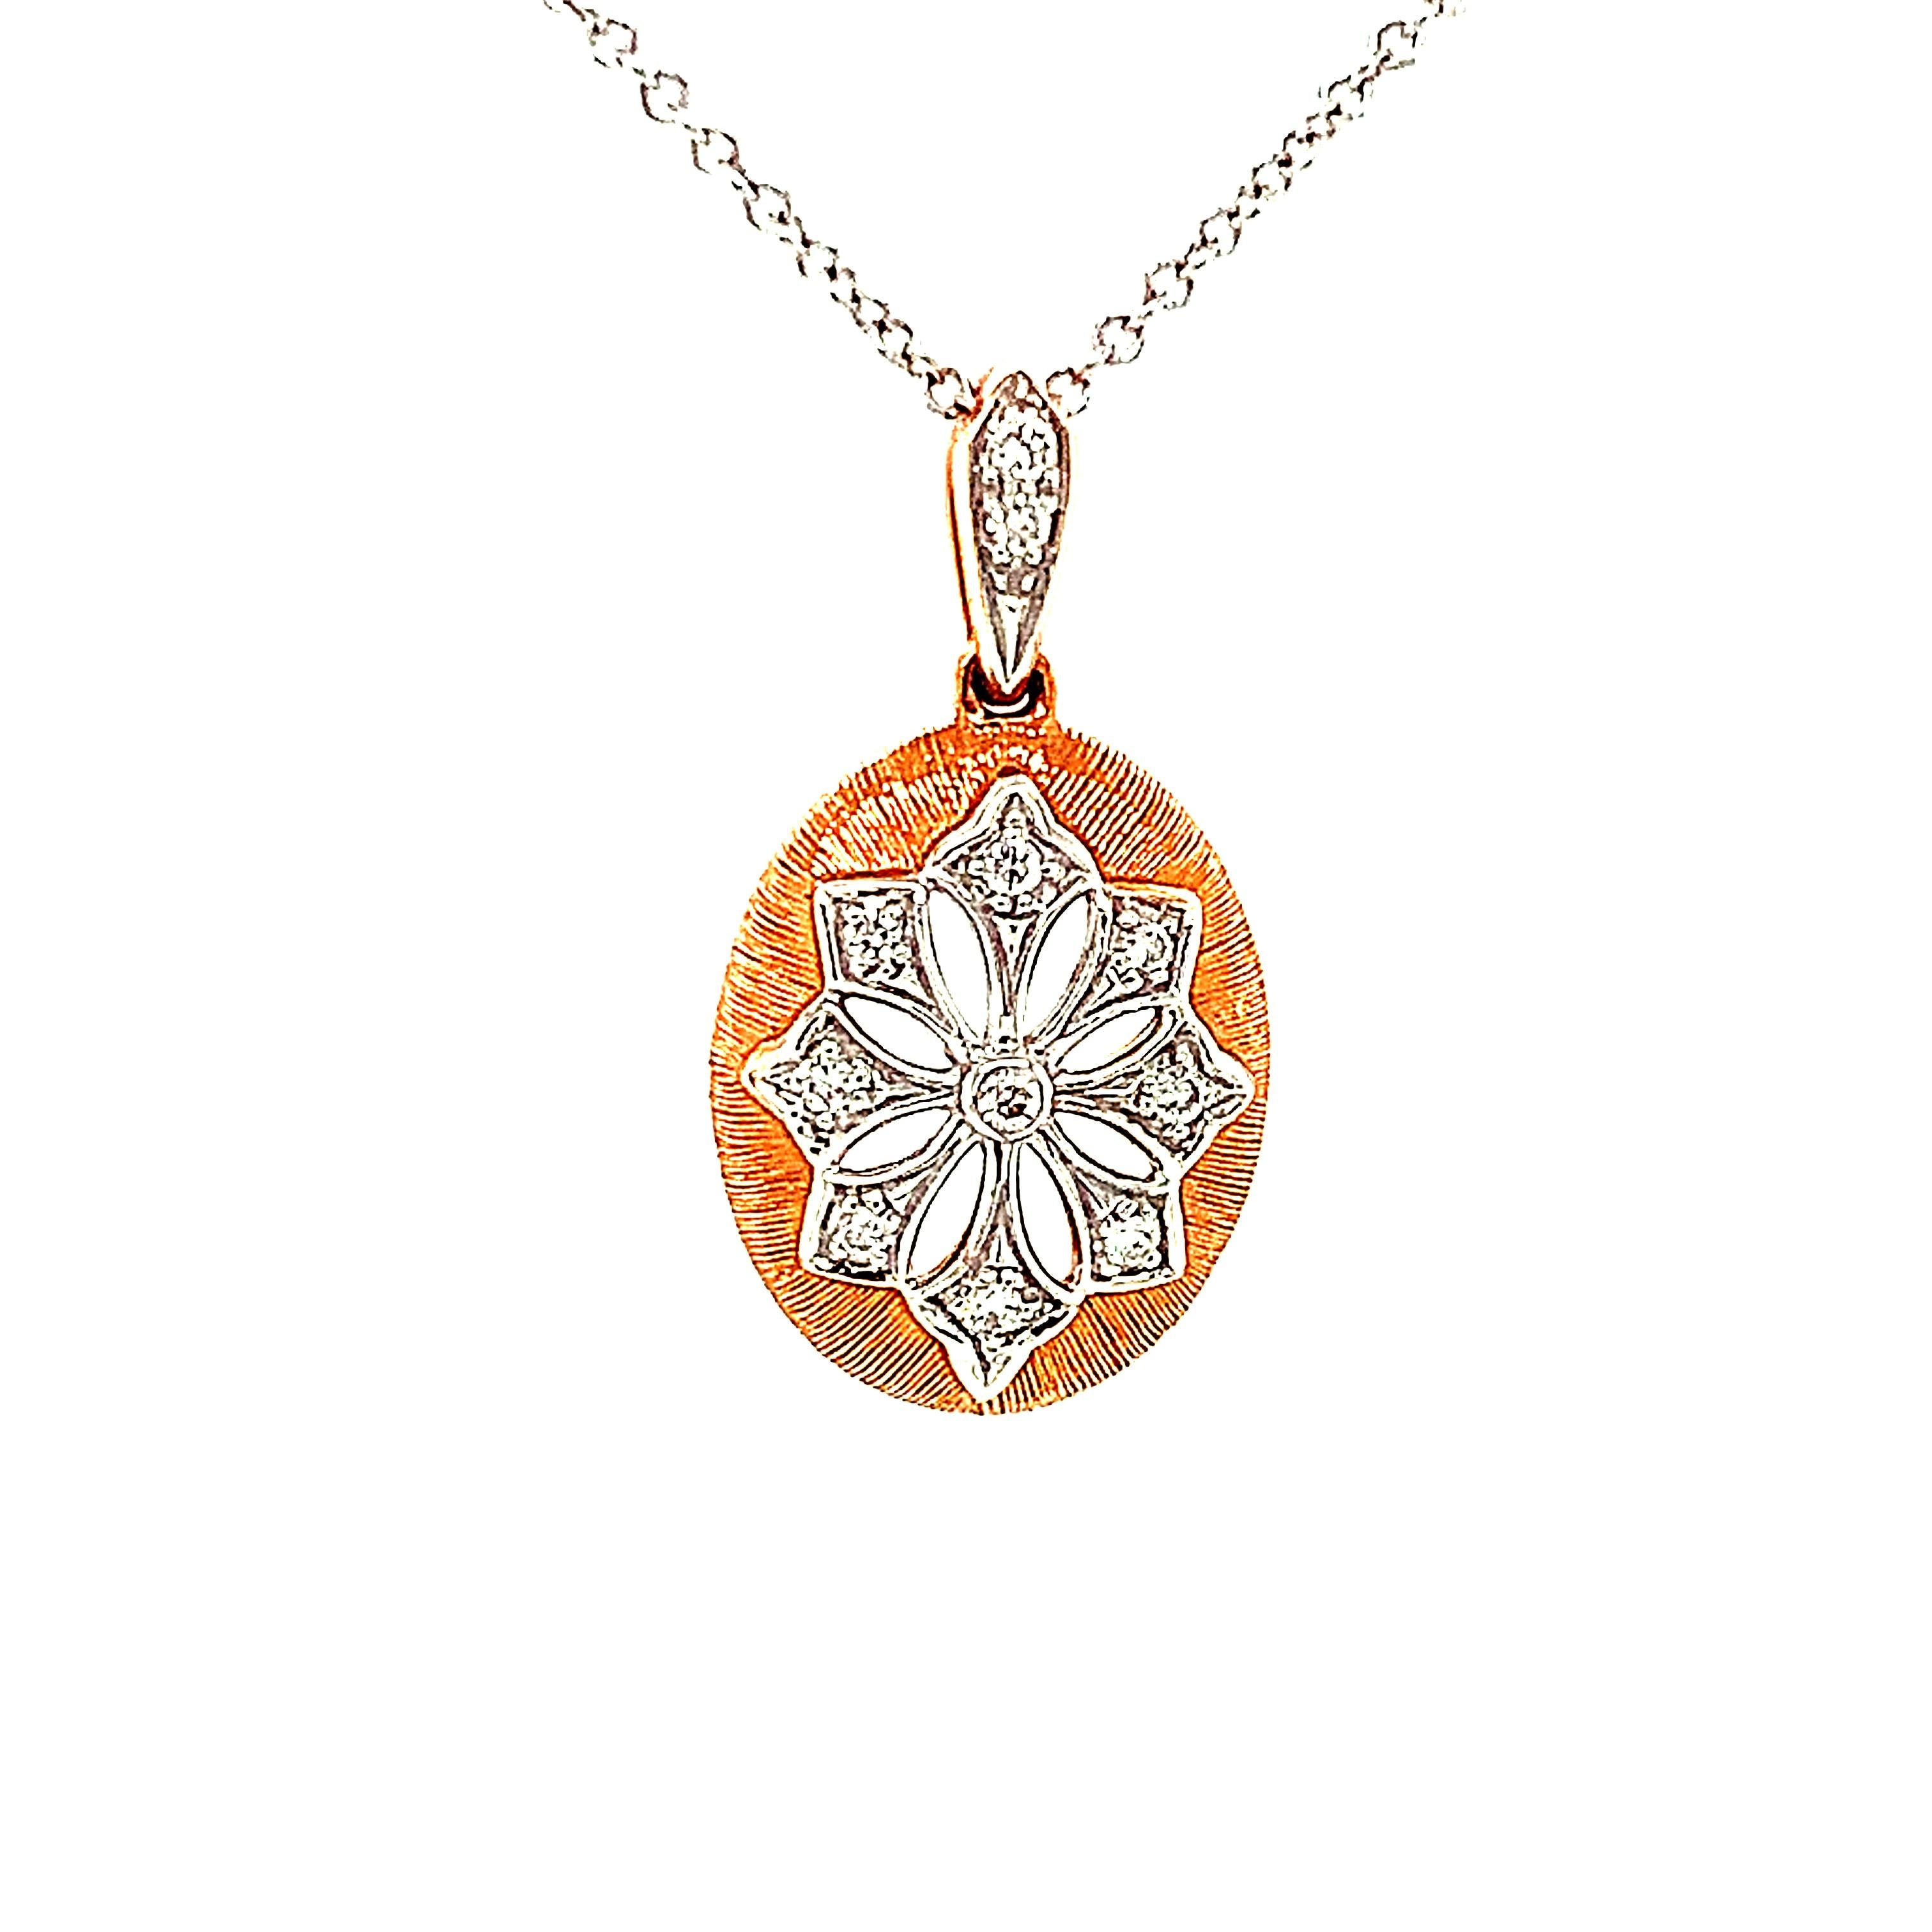 This necklace features a delicate Florentine-inspired starburst design that has been pave-set with sparkling diamonds! The 14k white gold starburst shows off beautifully intricate gold work and sits on a domed oval background of brush-finished 14k